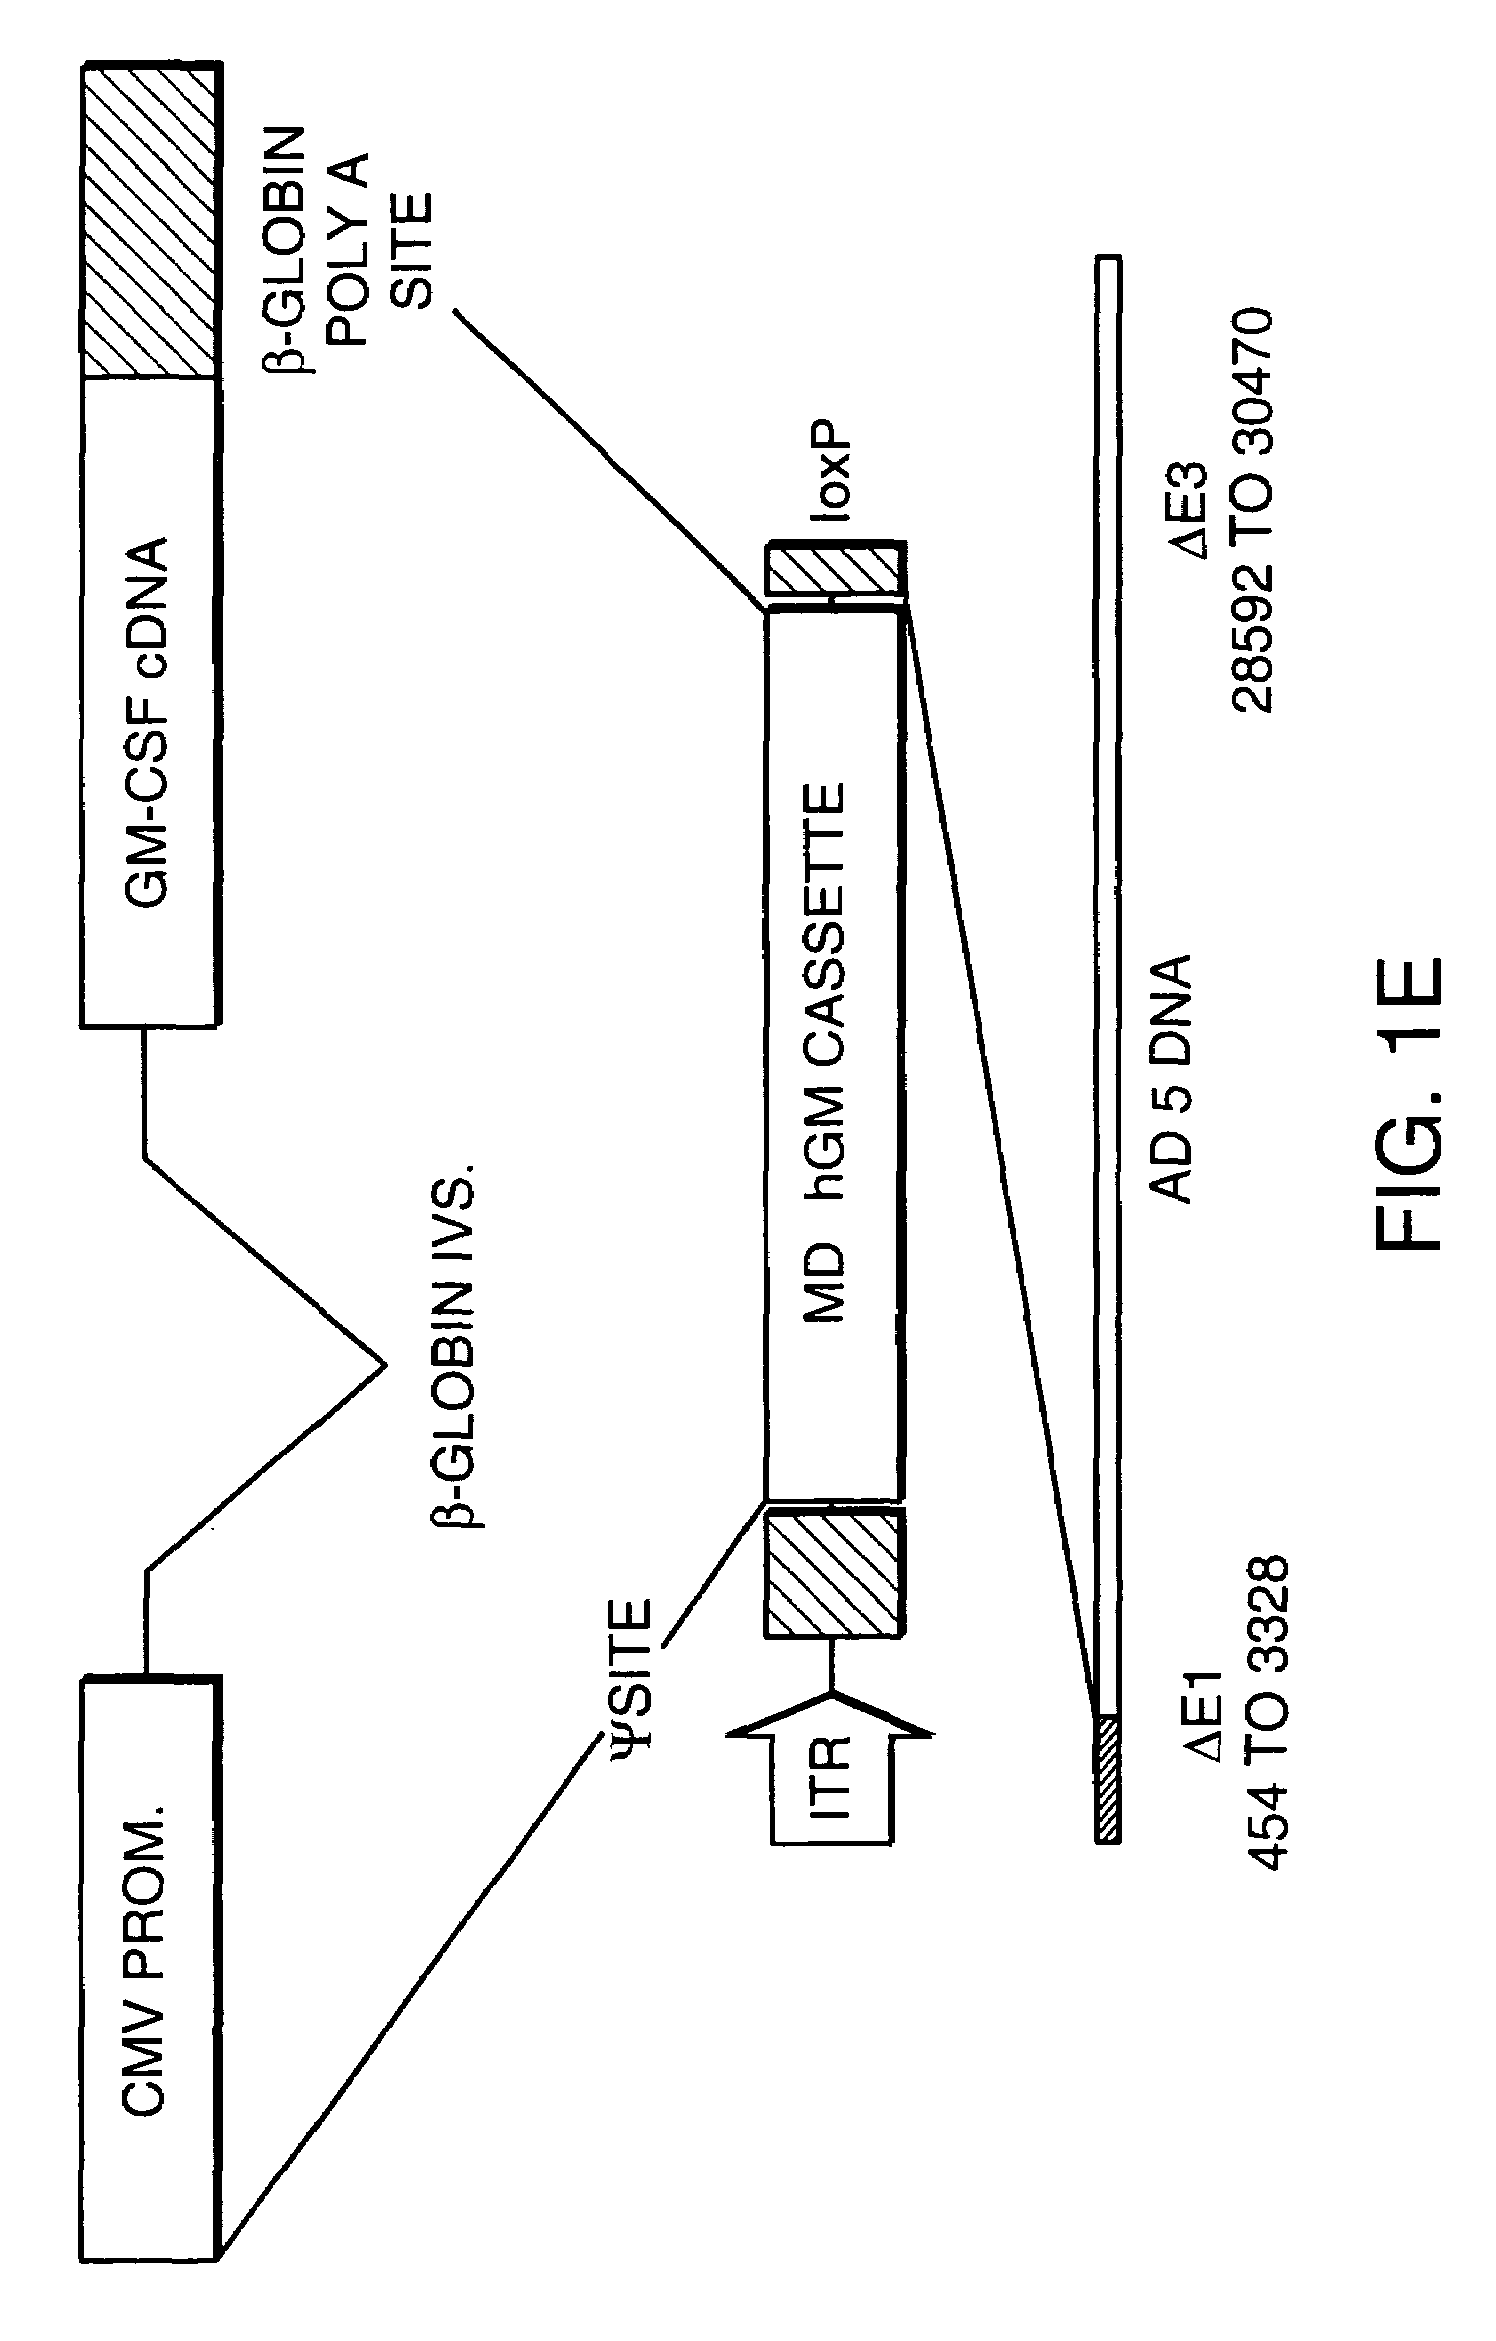 Cancer-associated antigens and methods of their identification and use